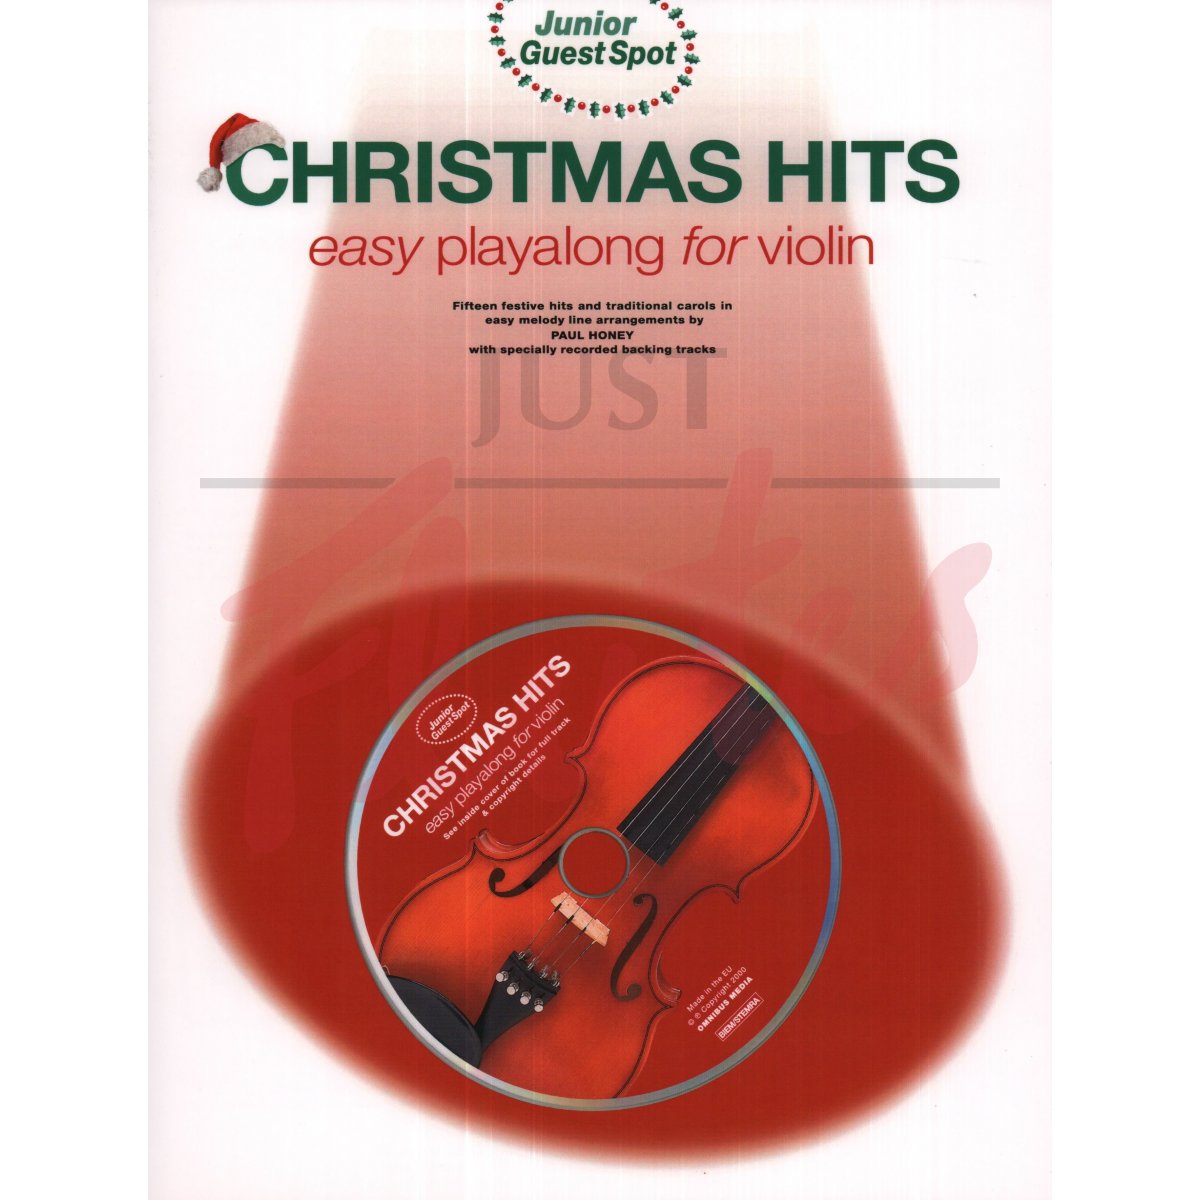 Junior Guest Spot - Christmas Hits for Violin